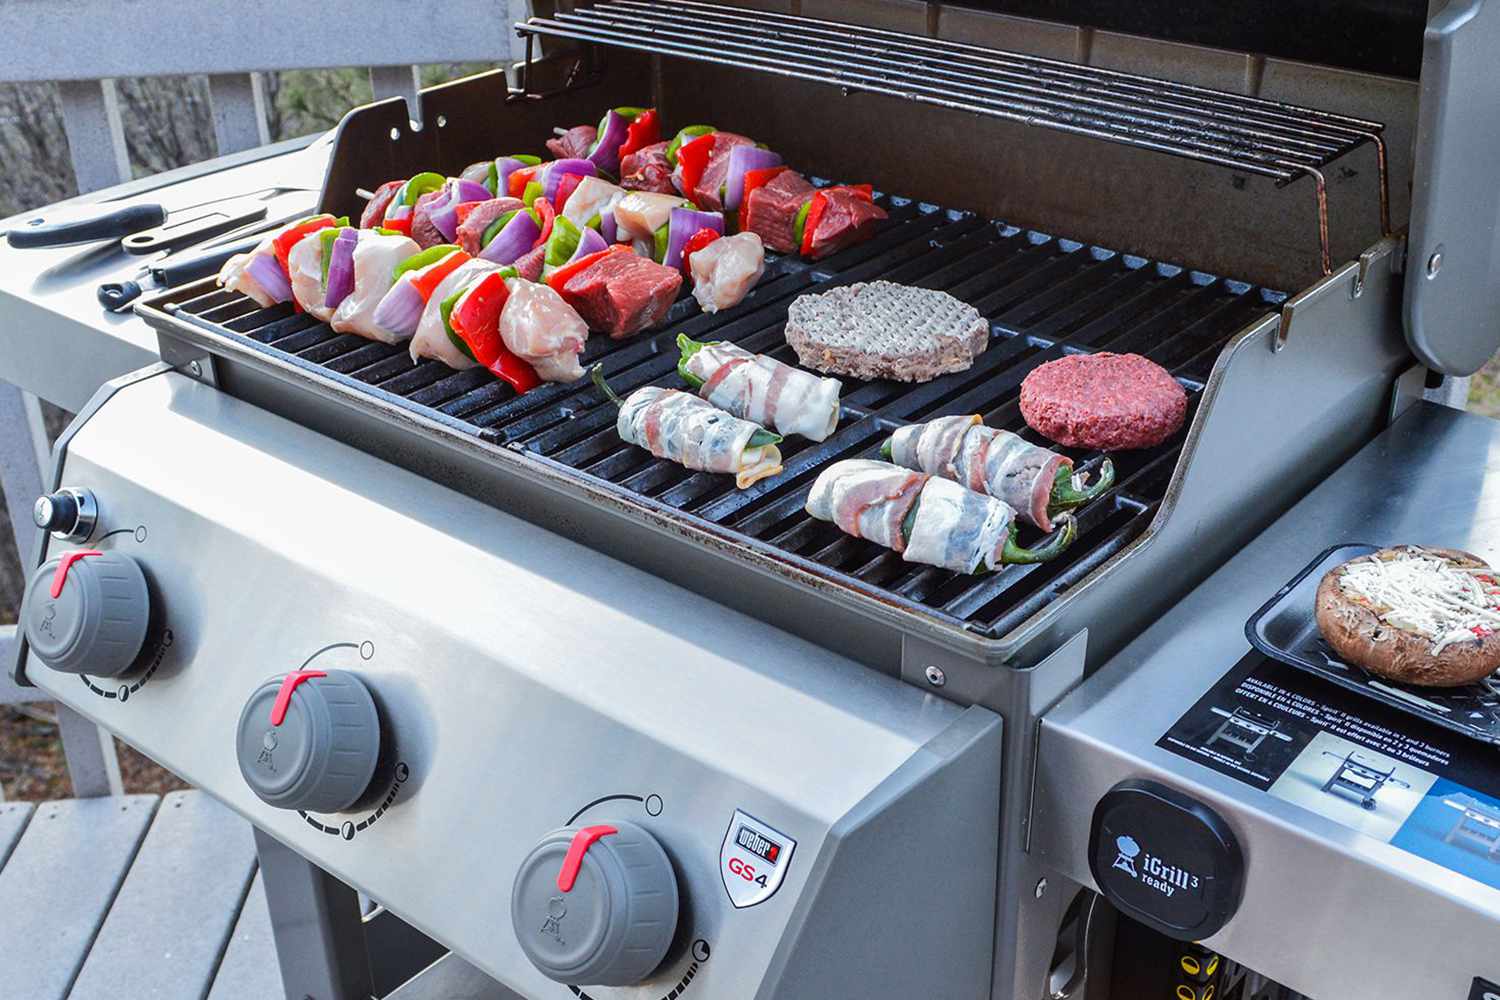 Weber Spirit E-310 Gas Grill with shish kebabs and hamburgers grilling